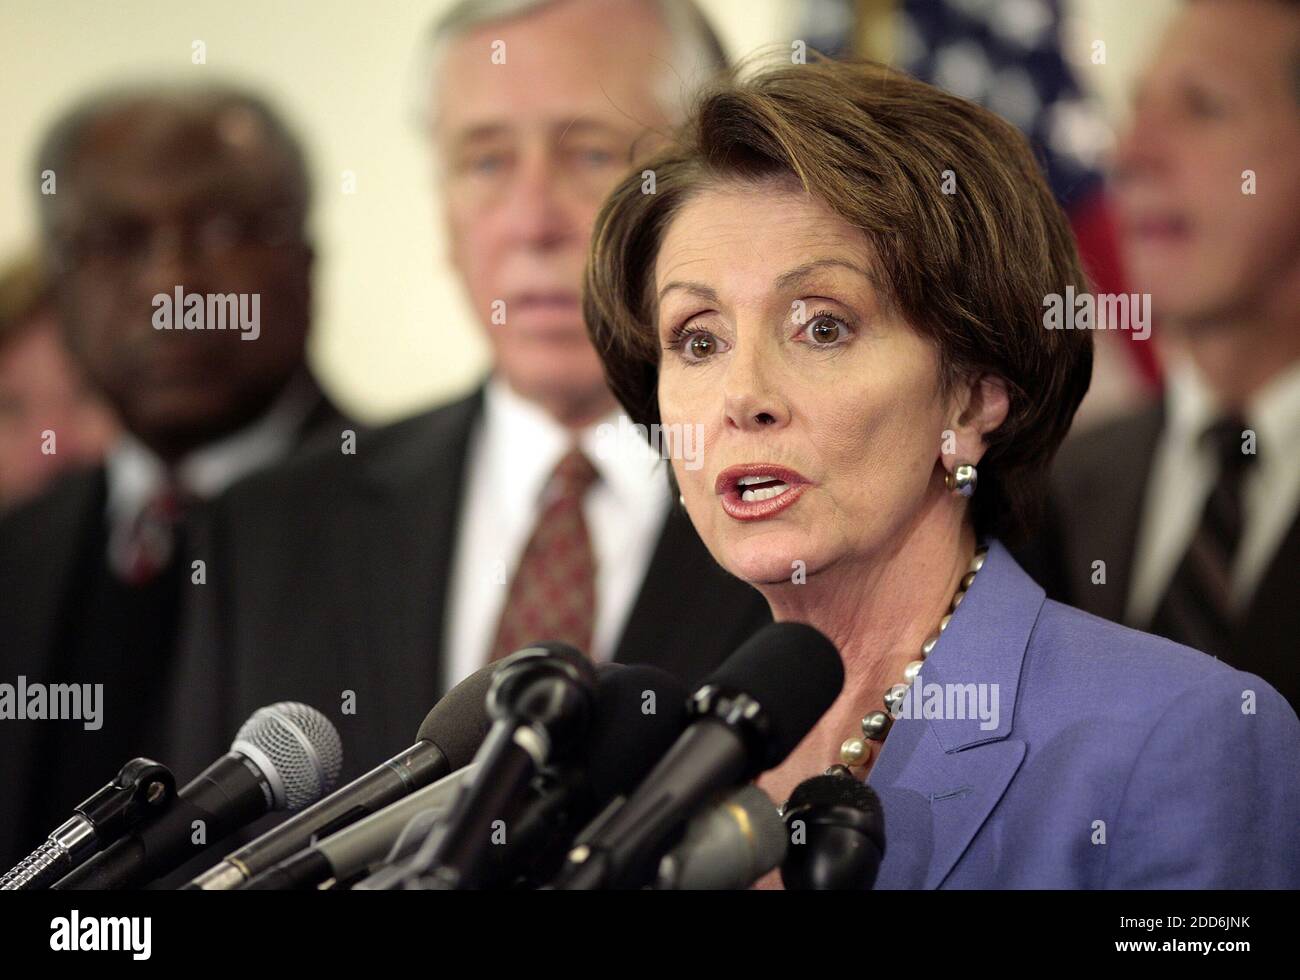 NO FILM, NO VIDEO, NO TV, NO DOCUMENTARY - Speaker of the House Nancy Pelosi, D-CA, speaks during a news conference at the Capitol, Thursday, January 18, 2007, in Washington. Democrats in Congress congratulated themselves after the House passed the last of six priority bills within a self-imposed deadline of the first 100 legislative hours. Photo by Chuck Kennedy/MCT/ABACAPRESS.COM Stock Photo